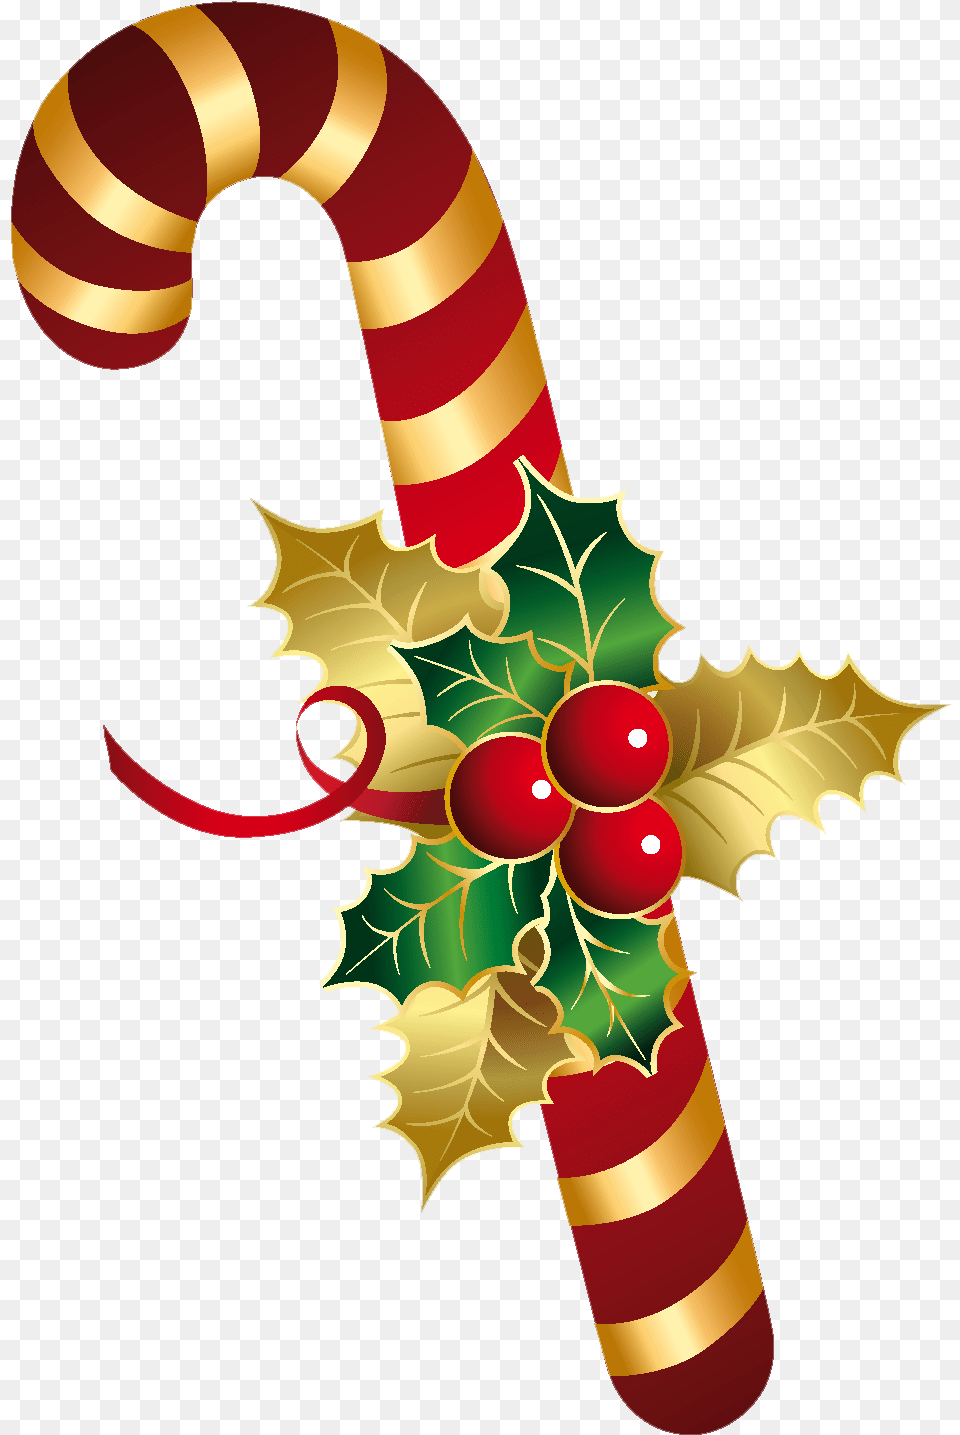 Candy Caneclipart Christmas Candy Cane Clipart, Dynamite, Weapon, Stick Png Image